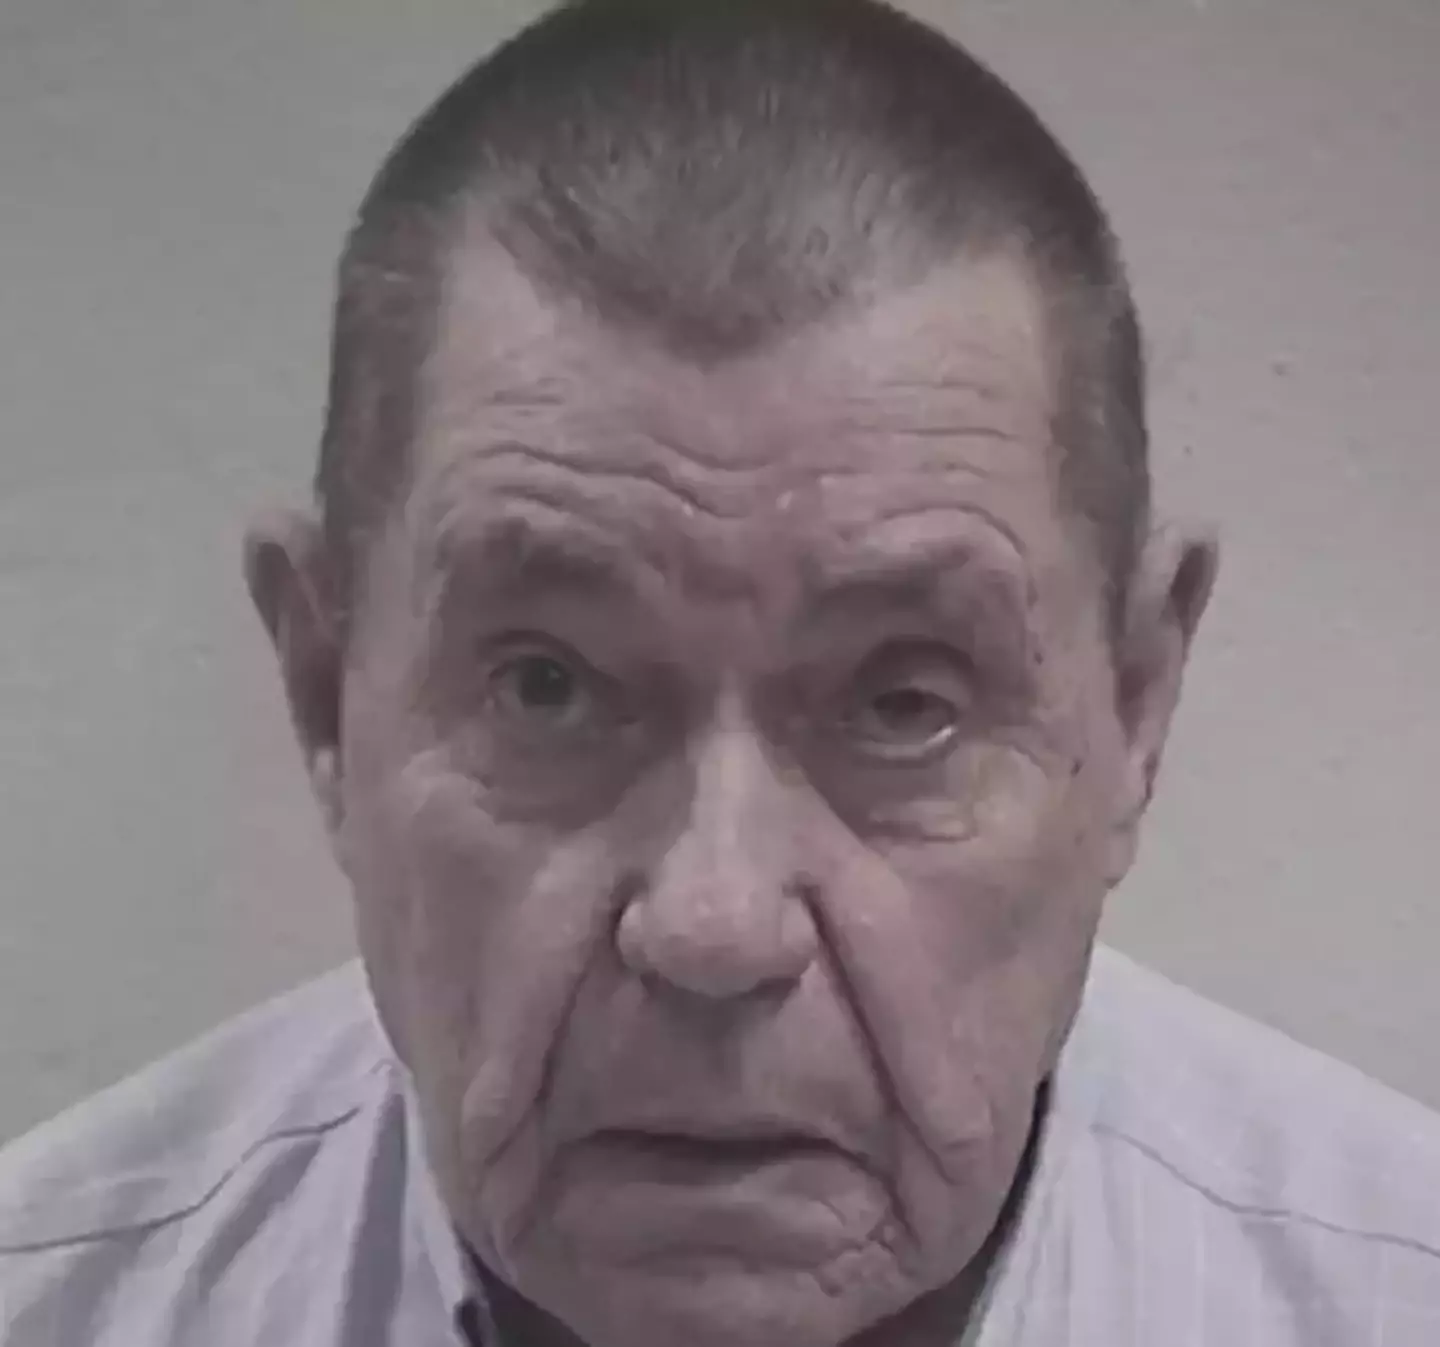 84-year-old Andrew D. Lester pleaded not guilty after shooting teenager Ralph Yarl point-blank range in the head.